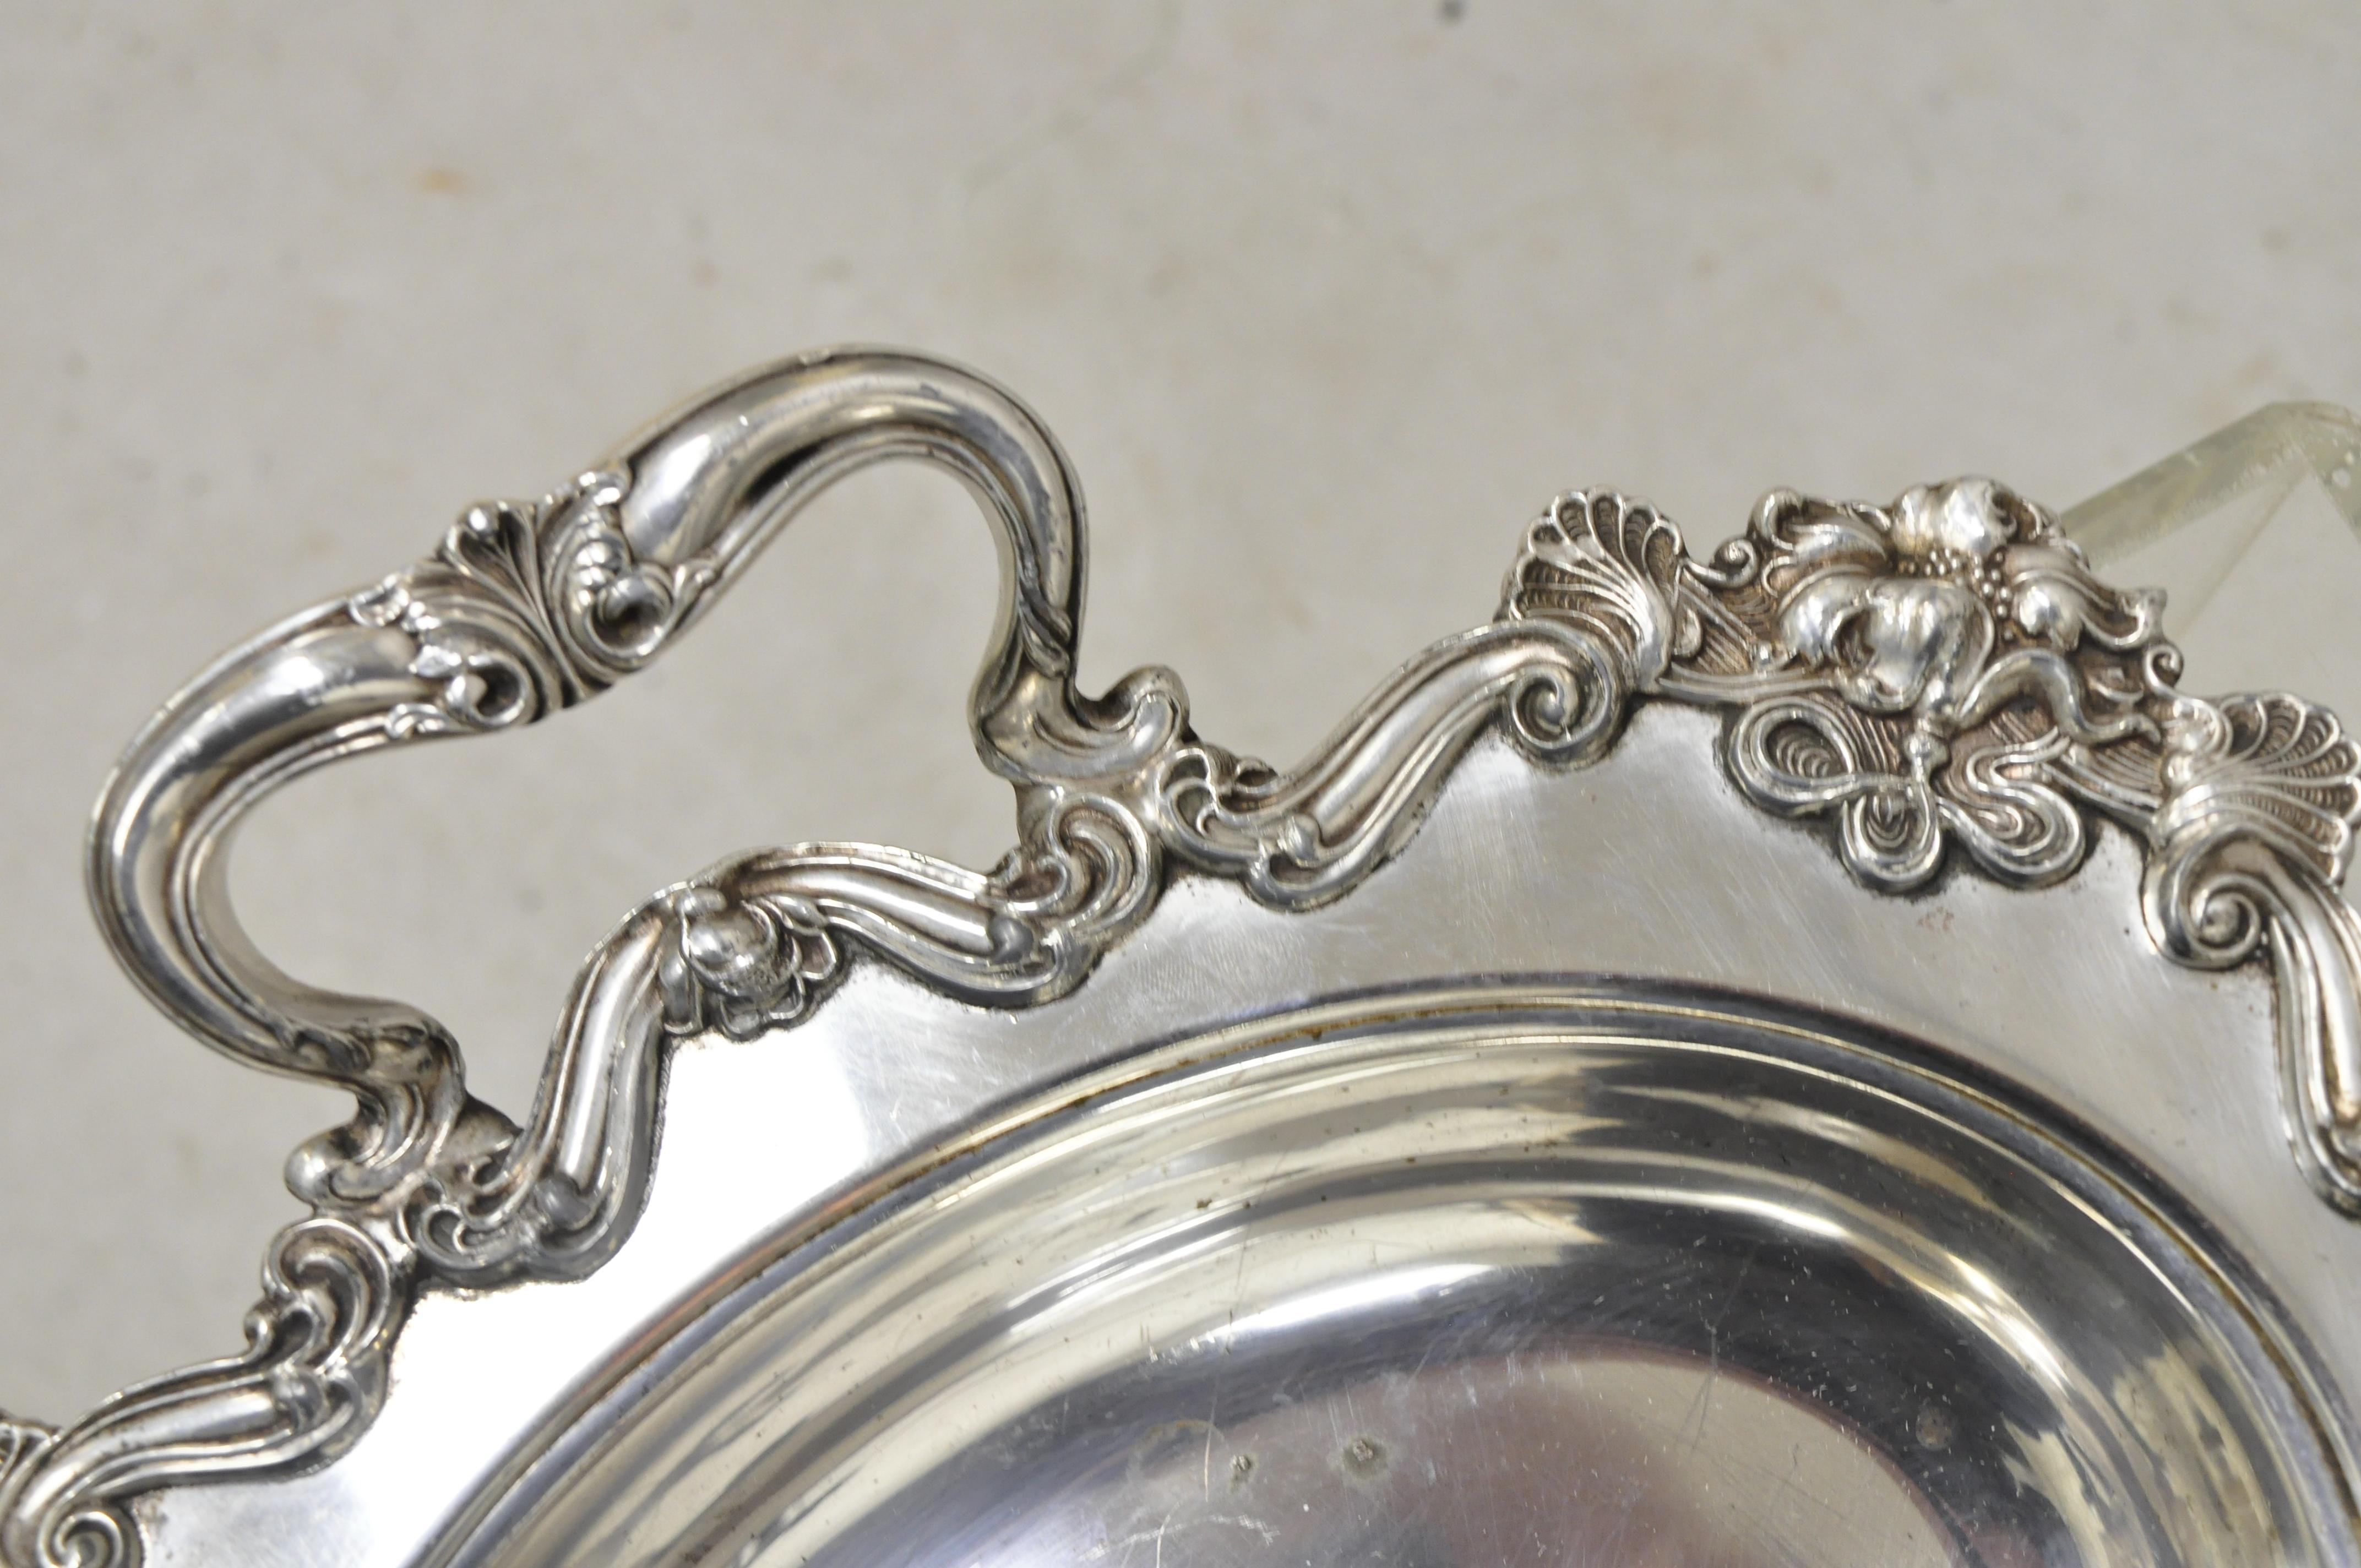 20th Century French Art Nouveau Silver Plate Double Side Serving Dish Platter Tray with Lids